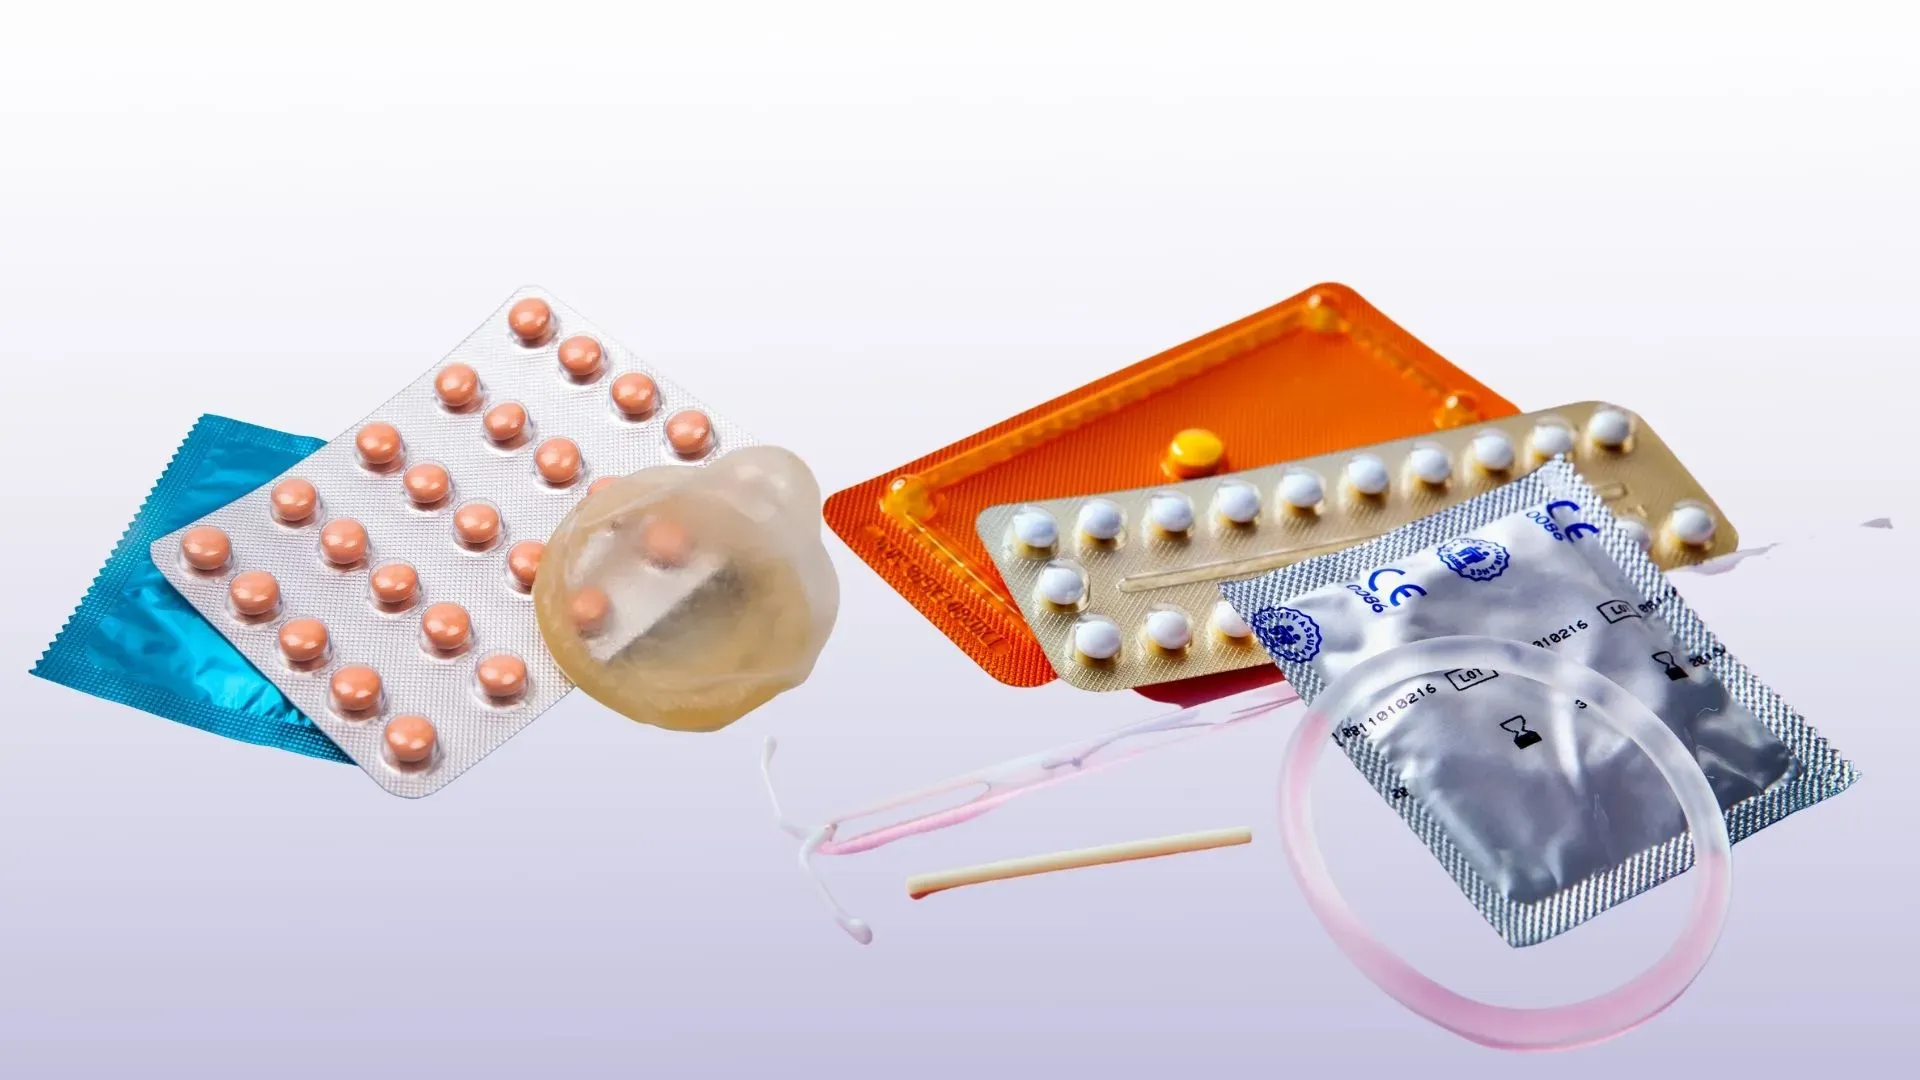 Contraceptive Methods and What You Need to Know image image